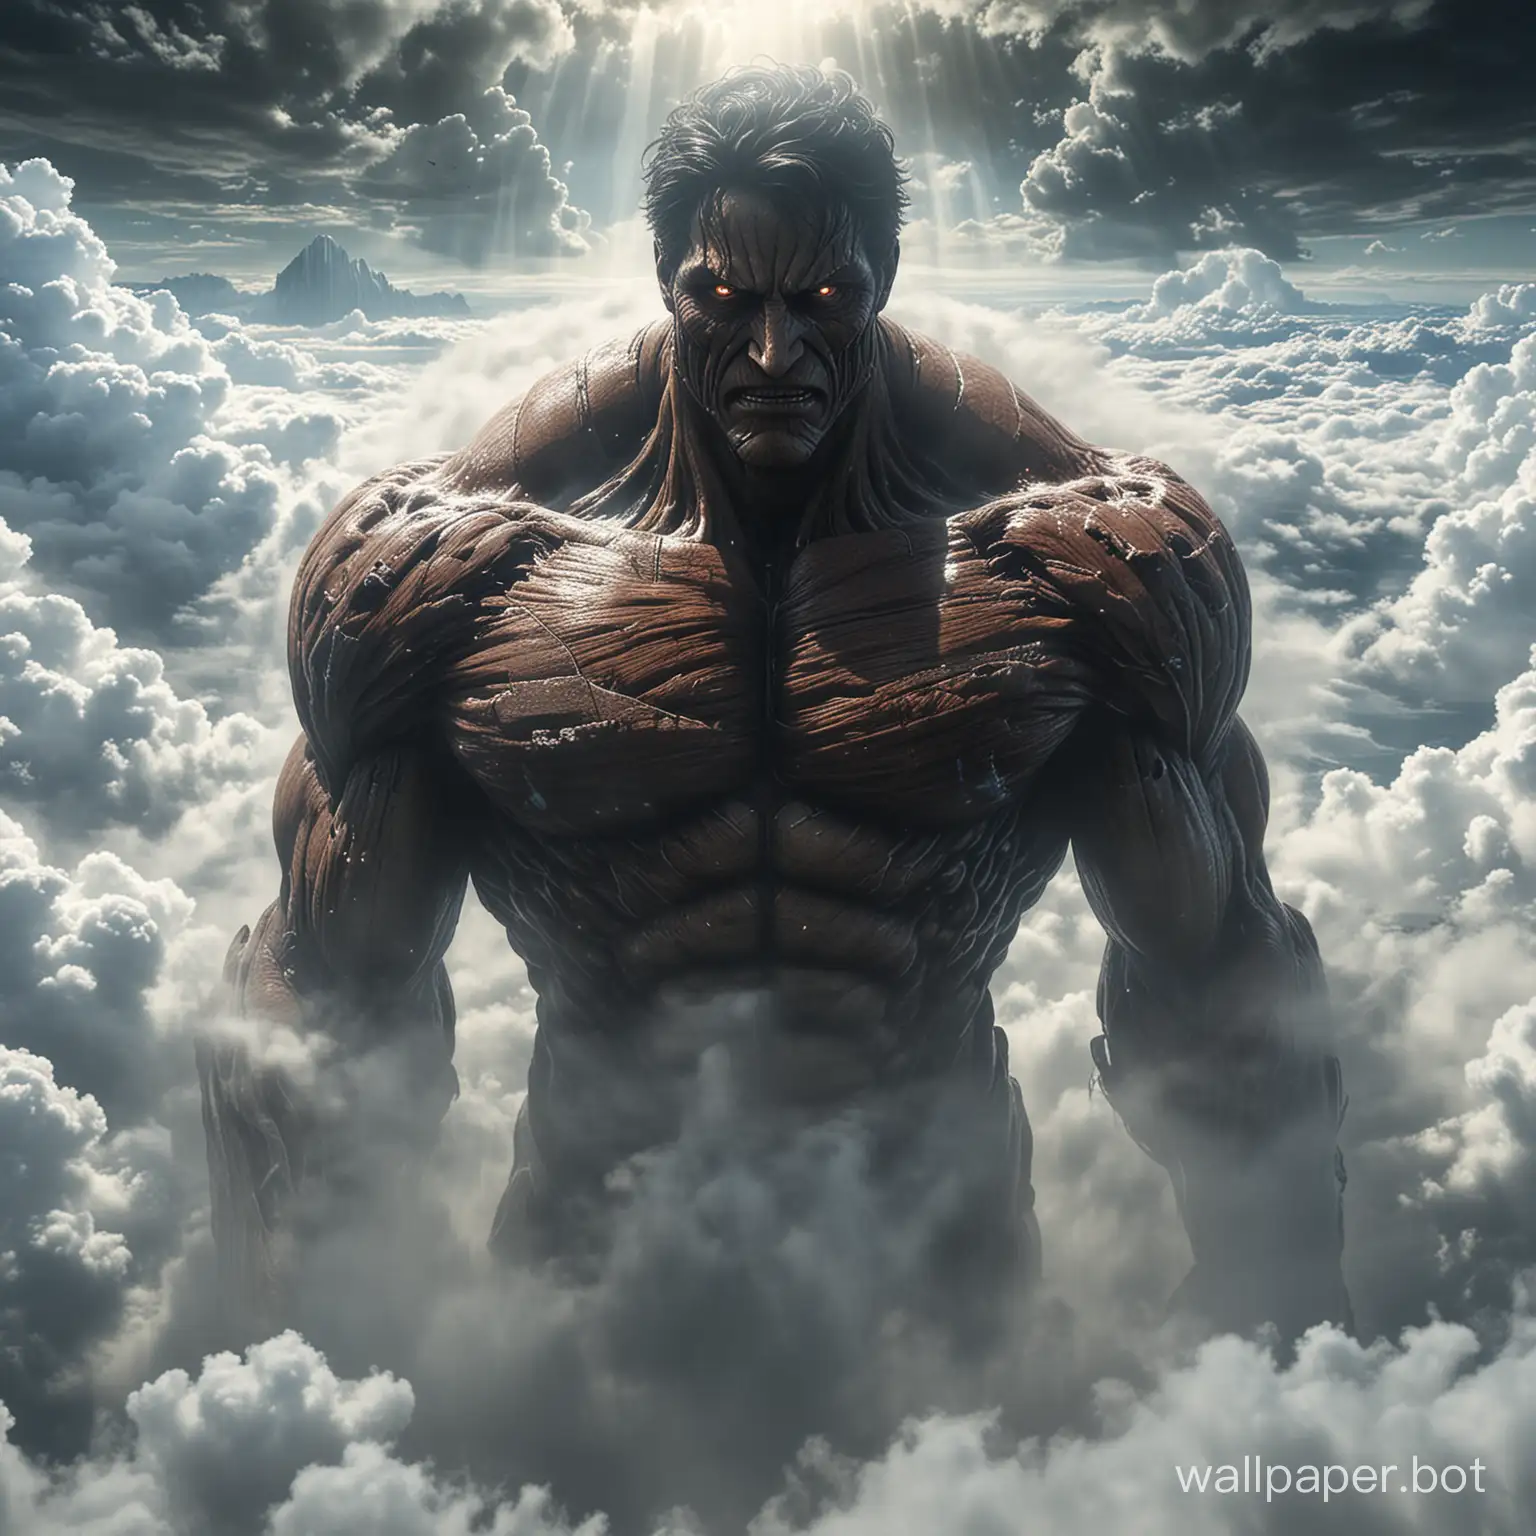 Colossal-Titan-Emerges-Above-Clouds-in-Enigmatic-Scene